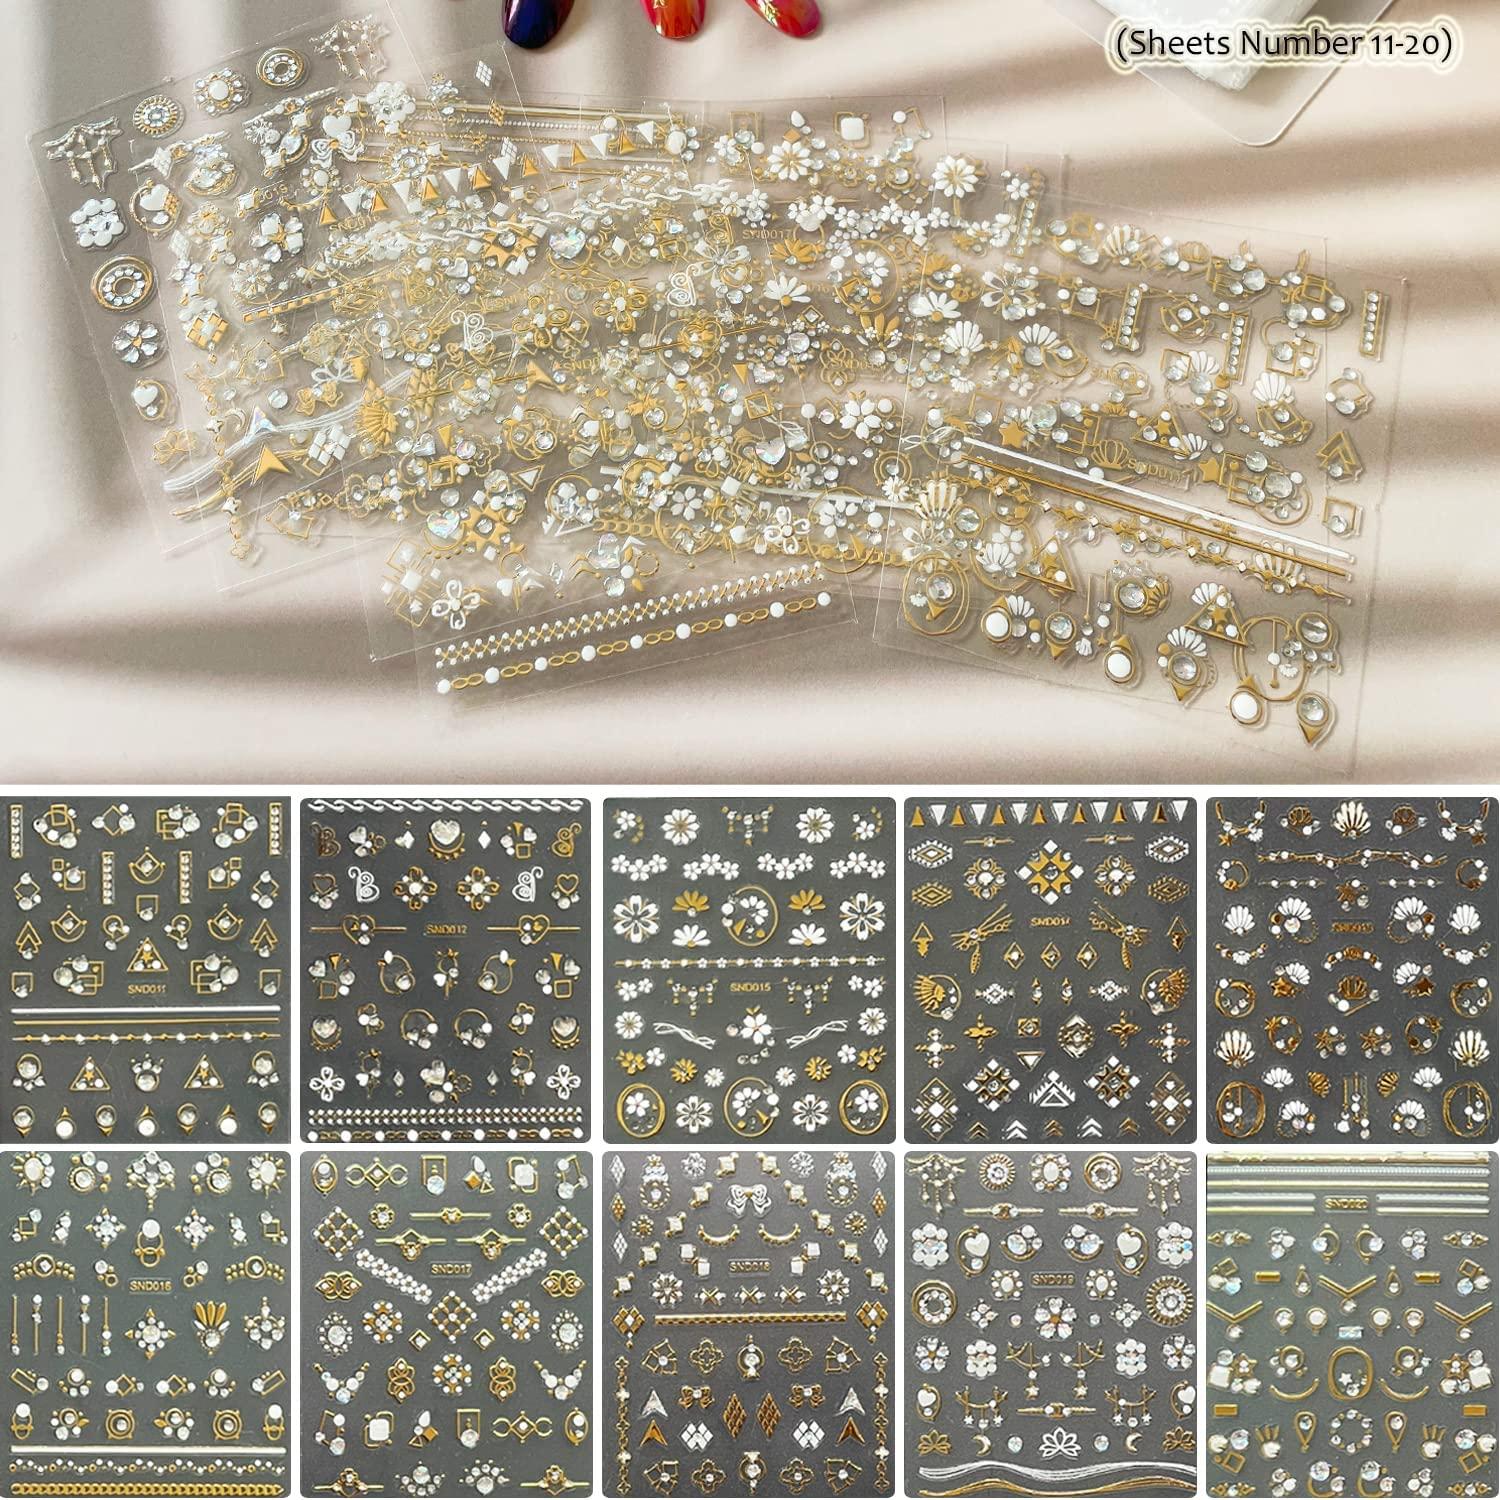 1 Lage Sheet Gold Shiny Nail Stickers Luxury Nail Salon Design Chic 3D Nail Art Stickers Decals Self-Adhesive Manicure for Nails Decoration (004)